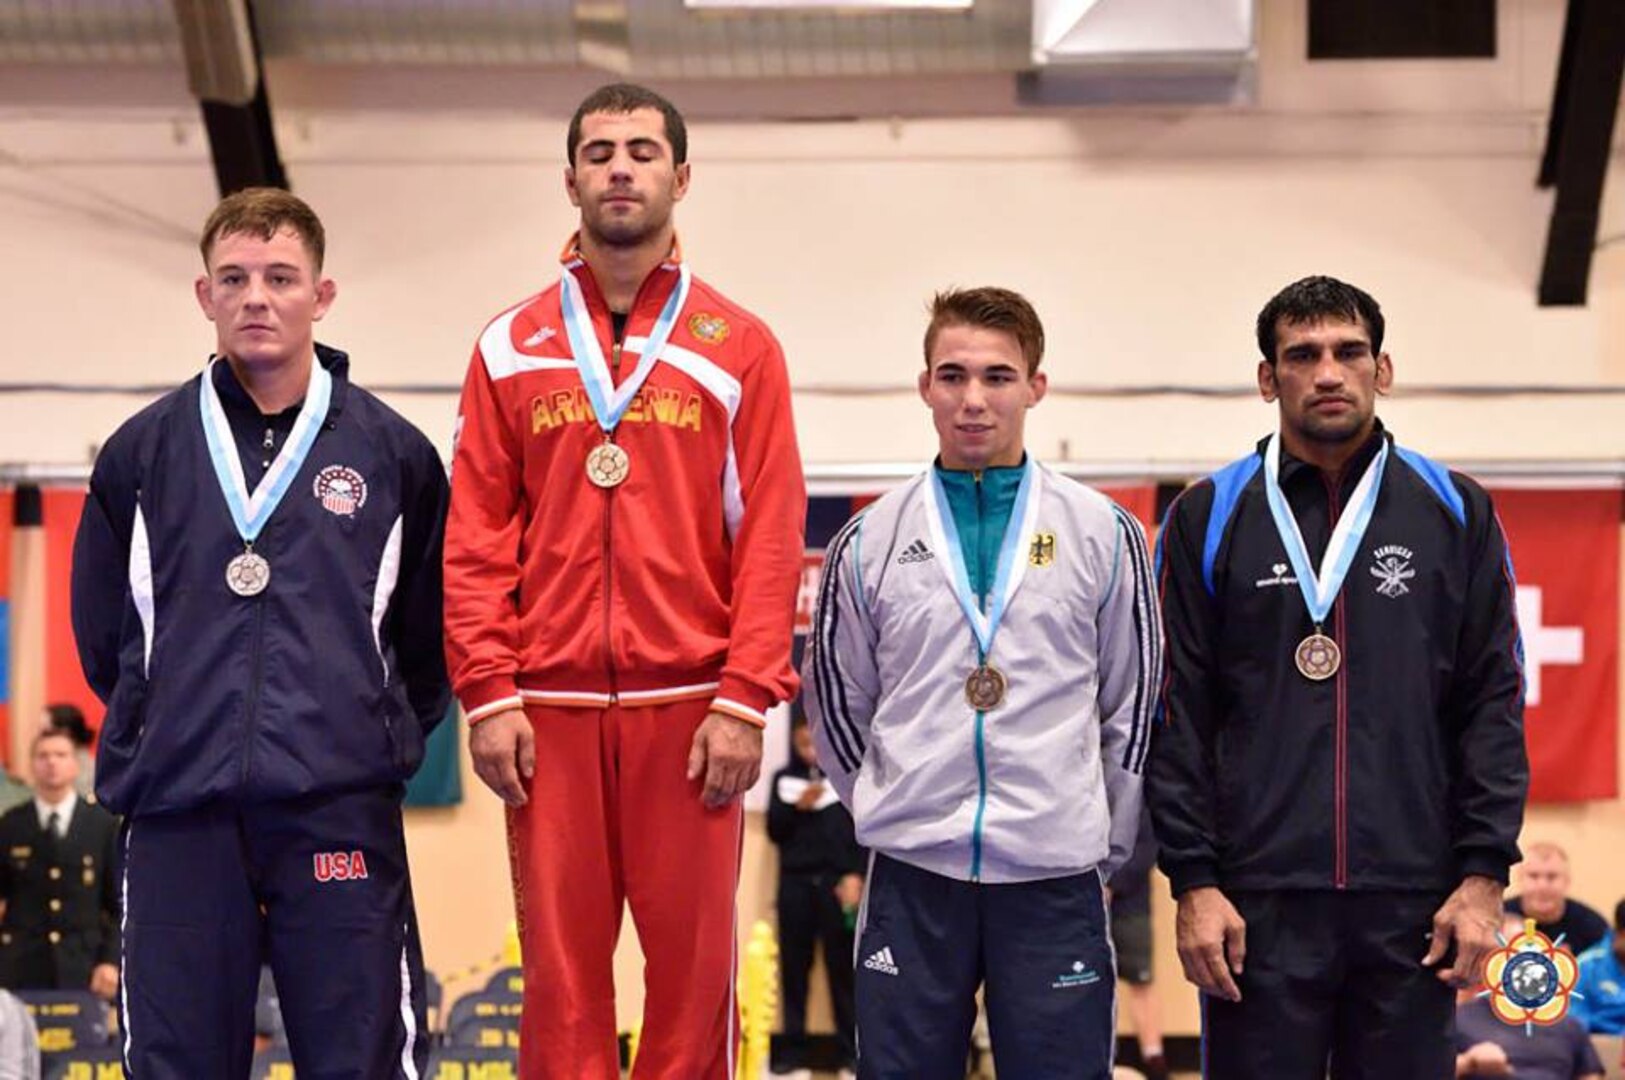 US Youth Team Breaks Medal Record In Brazil!